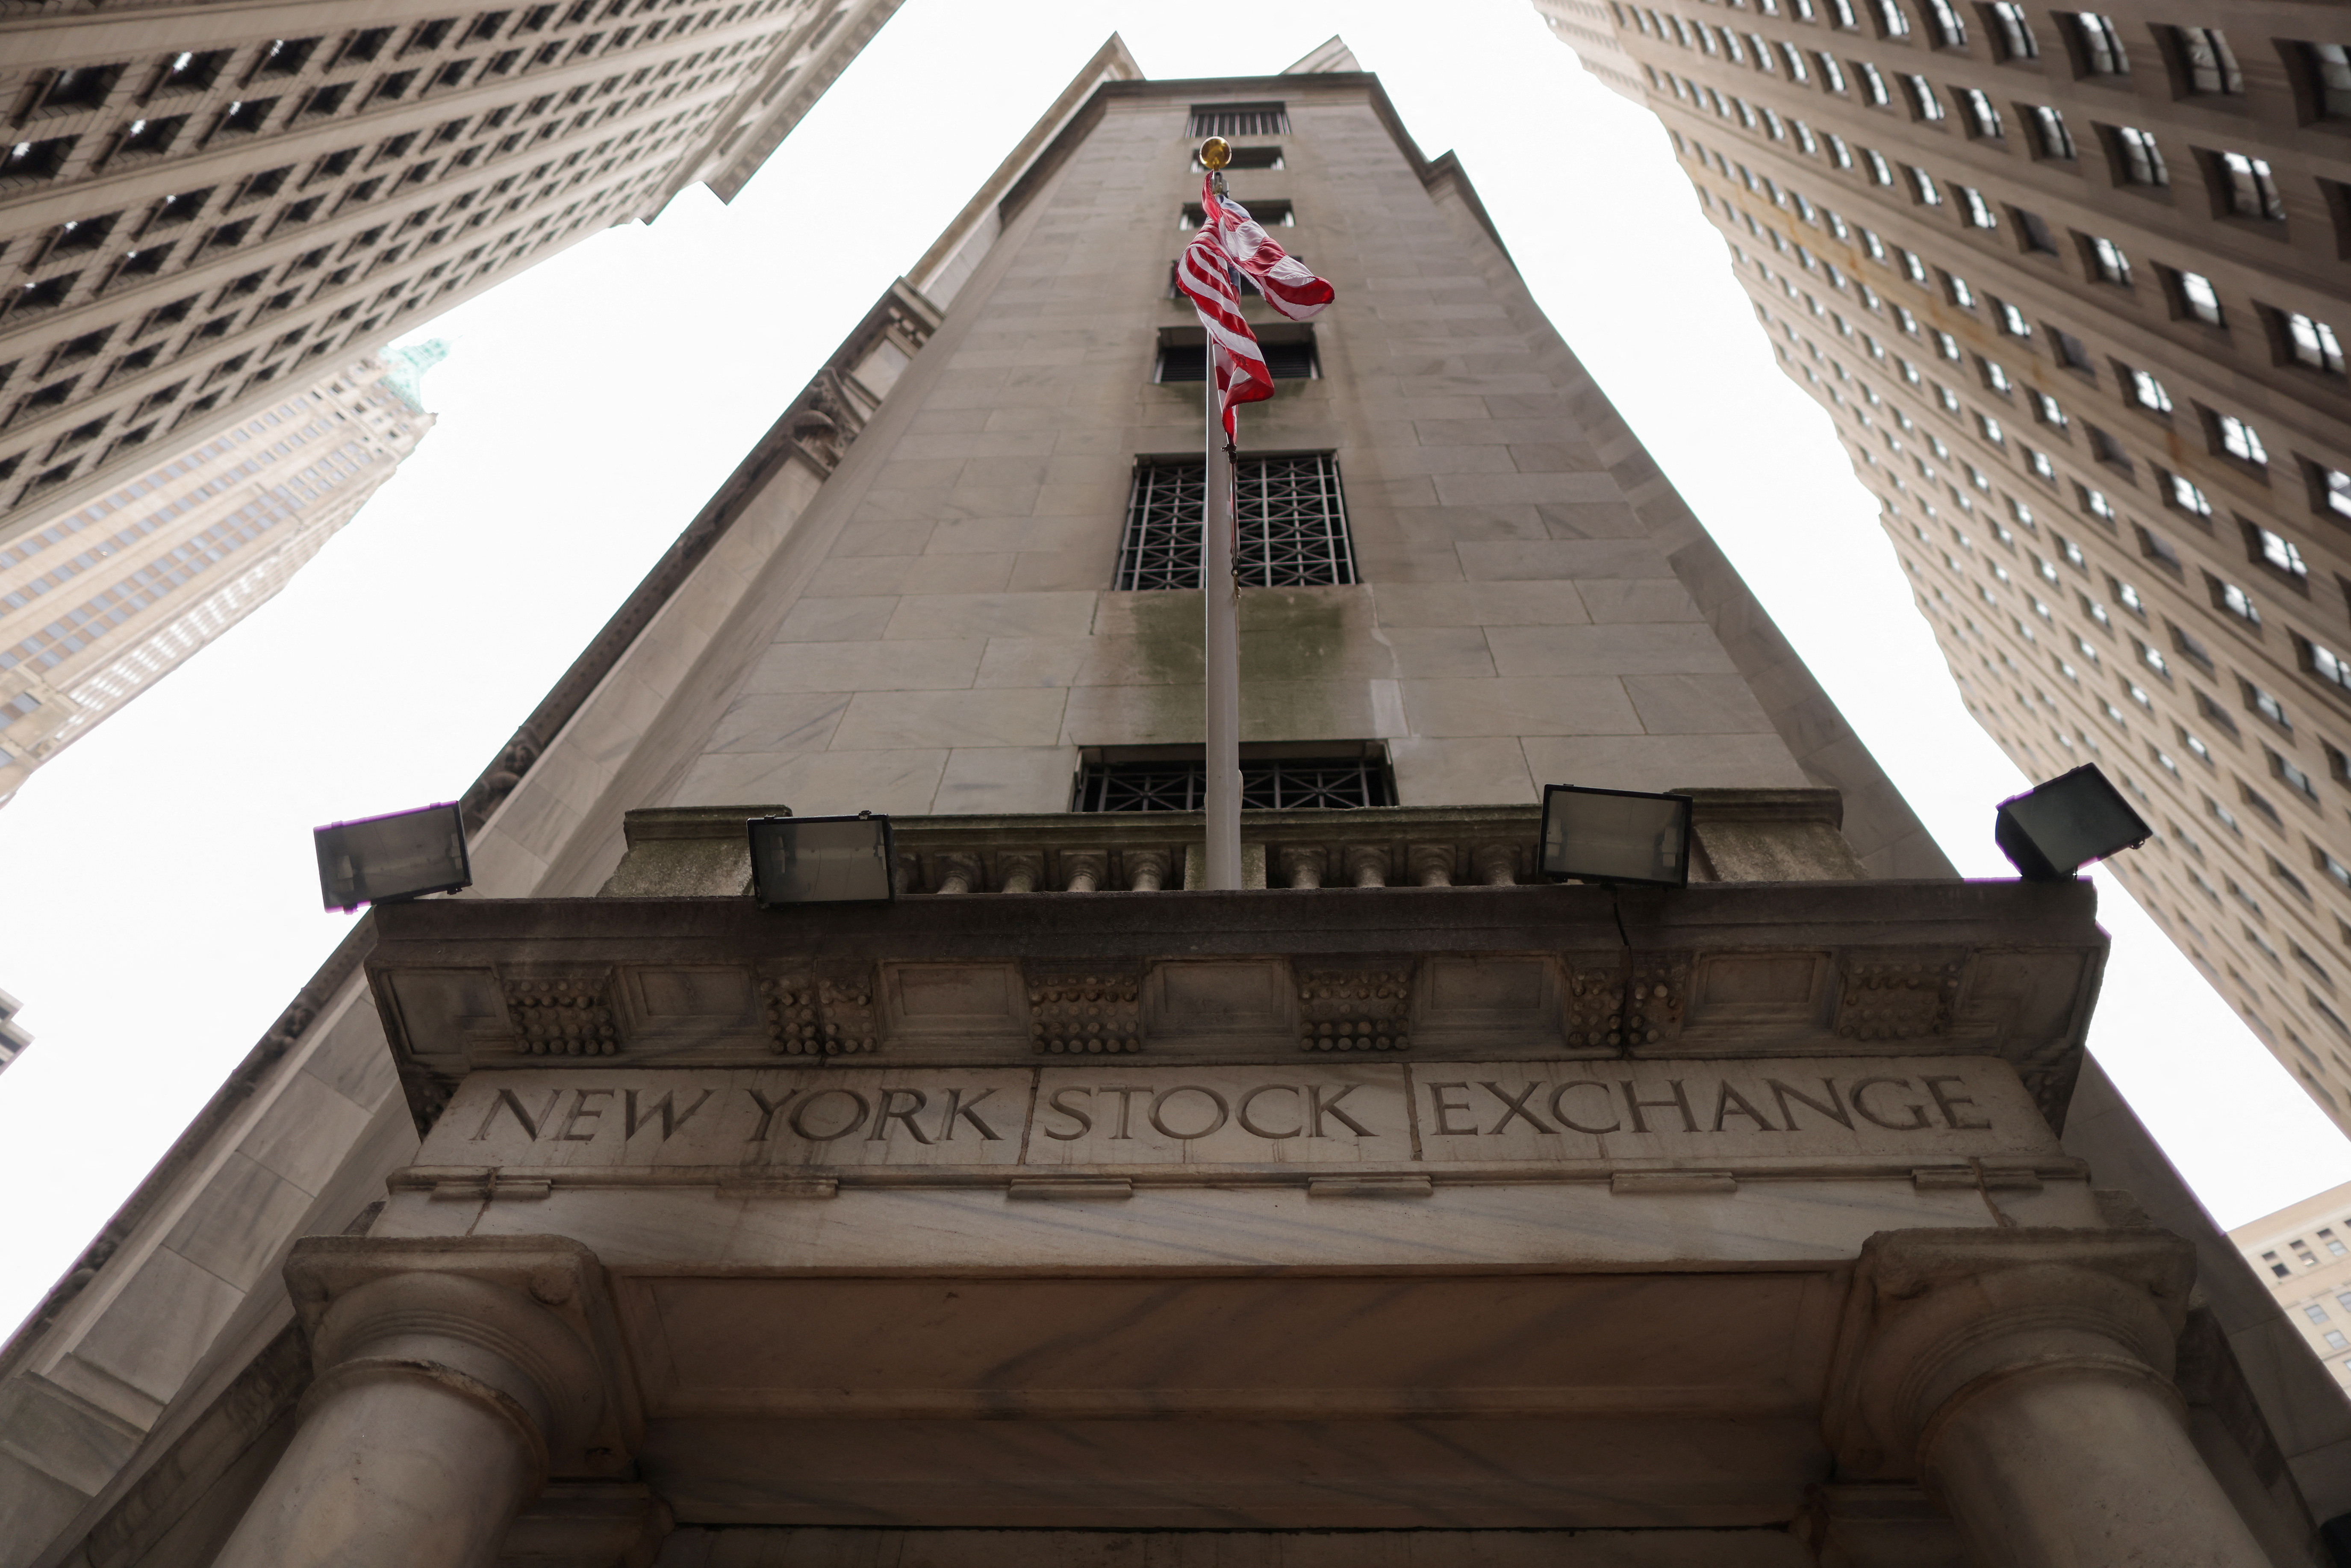 Signage is seen at the New York Stock Exchange (NYSE) in Manhattan, New York City